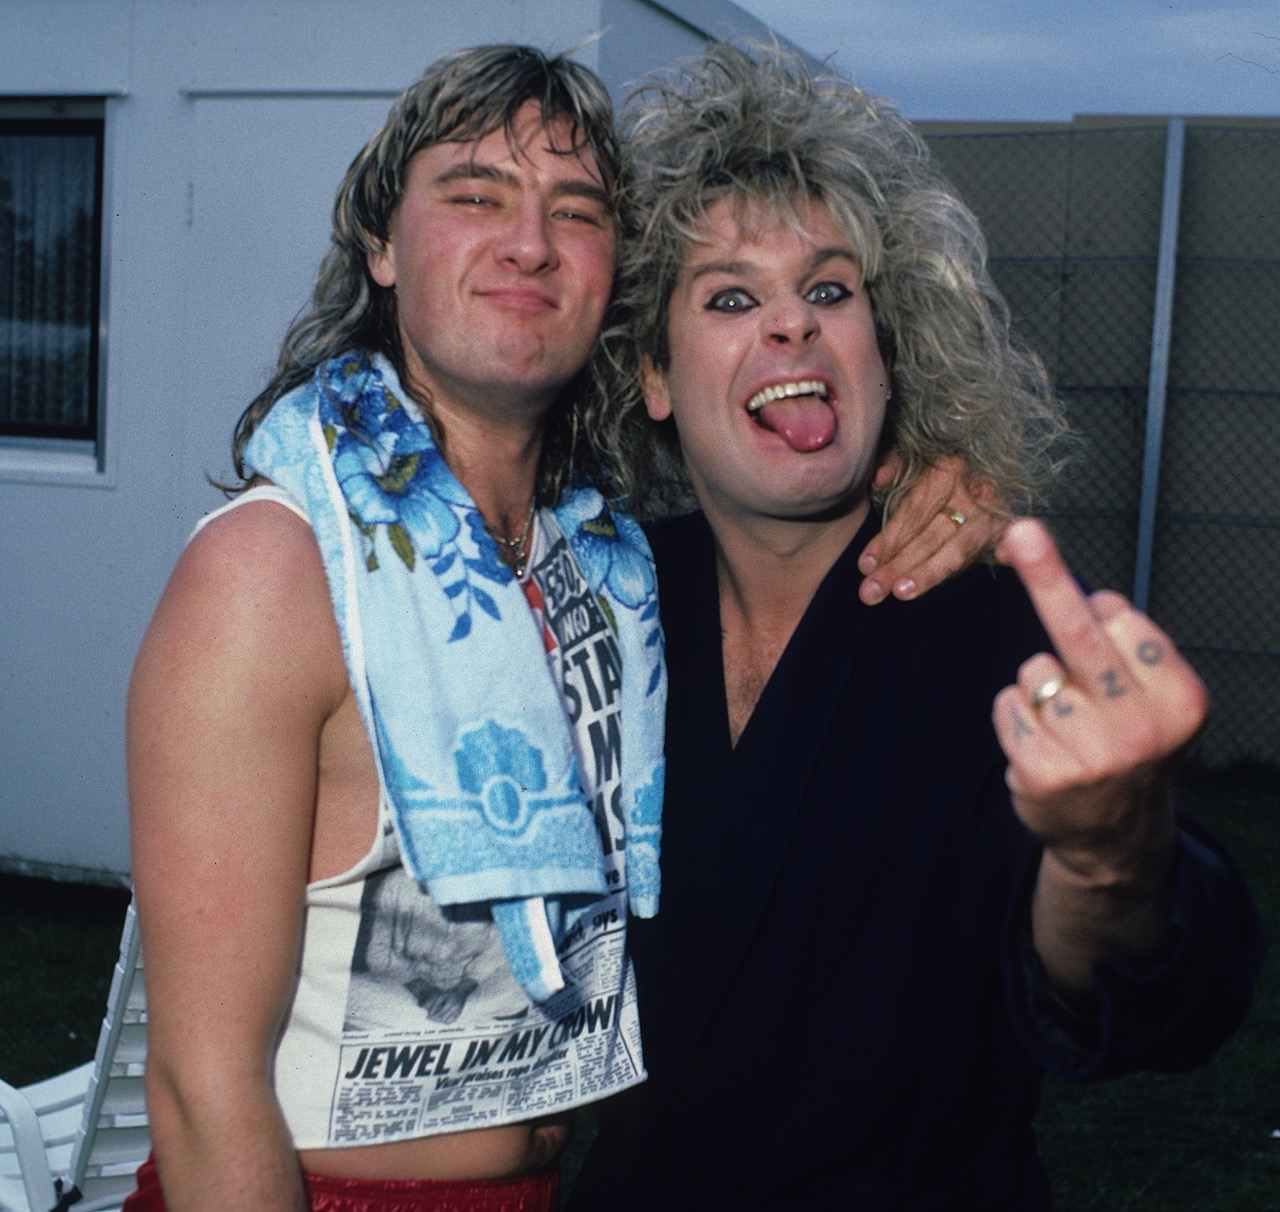 Joe Eliot singer in Def Leppard and Ozzy backstage at Donnington